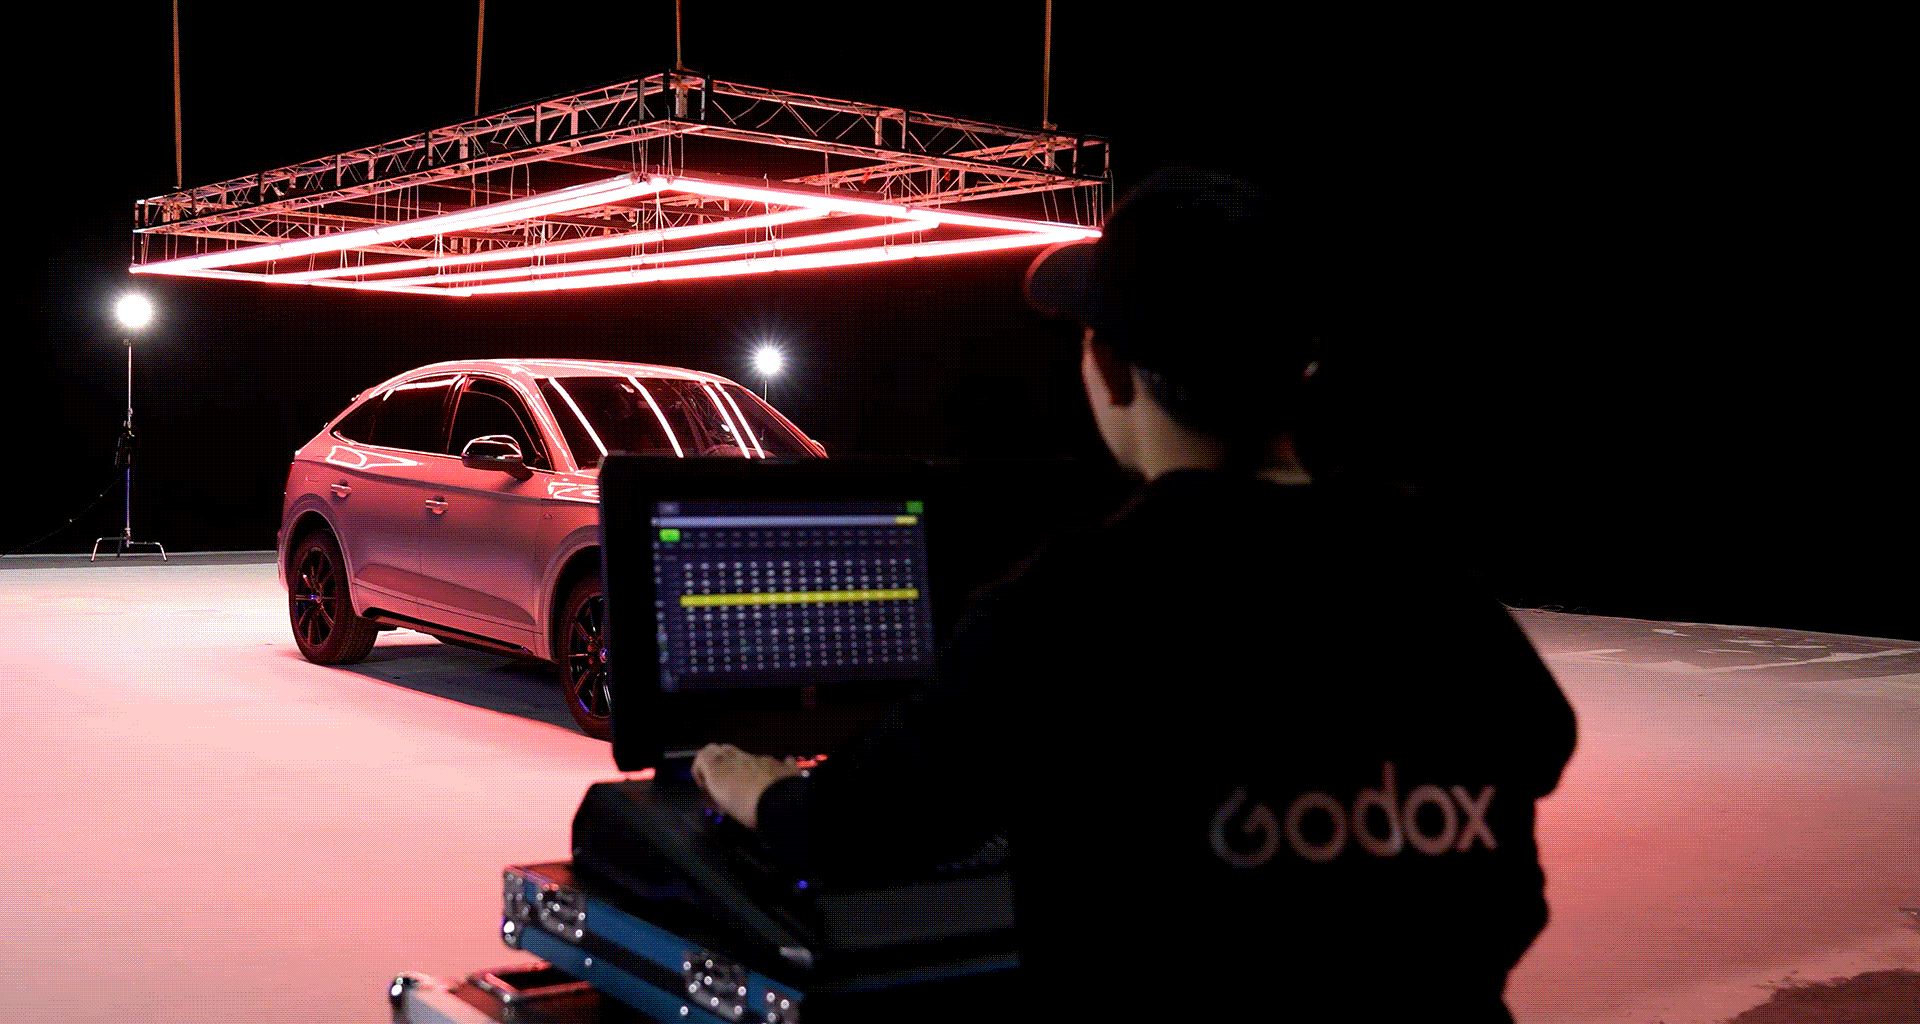 GODOX KNOWLED TP4R-K4 RGBWW Pixel Tube Light being controlled by a DMX control console